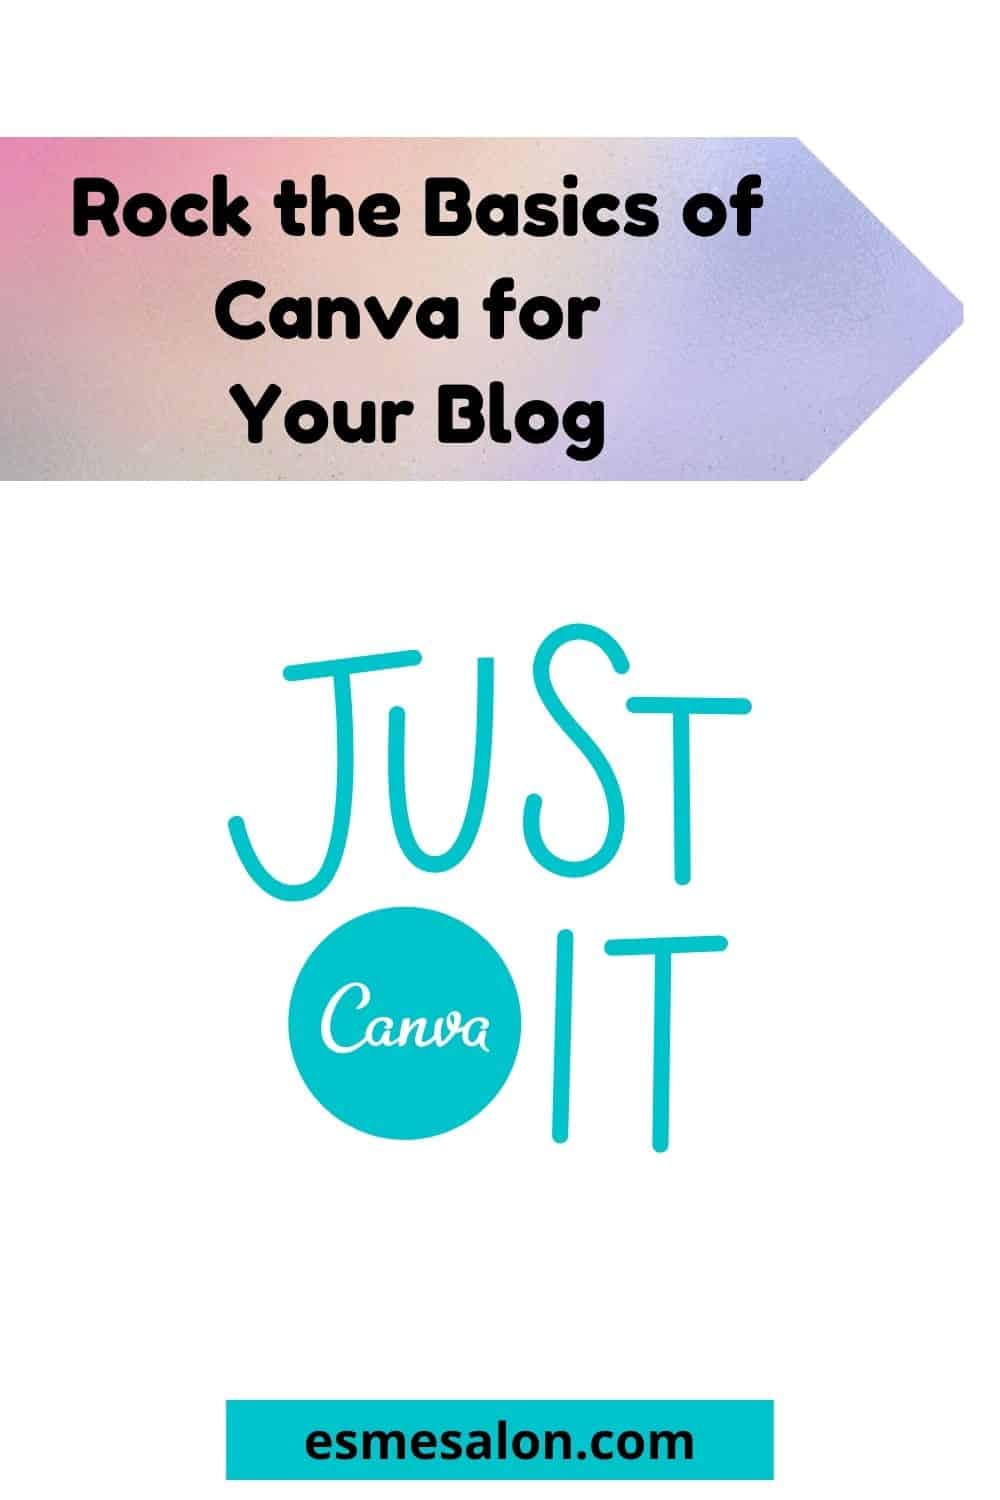 Just Canva written on a white background and Canva part of the logo